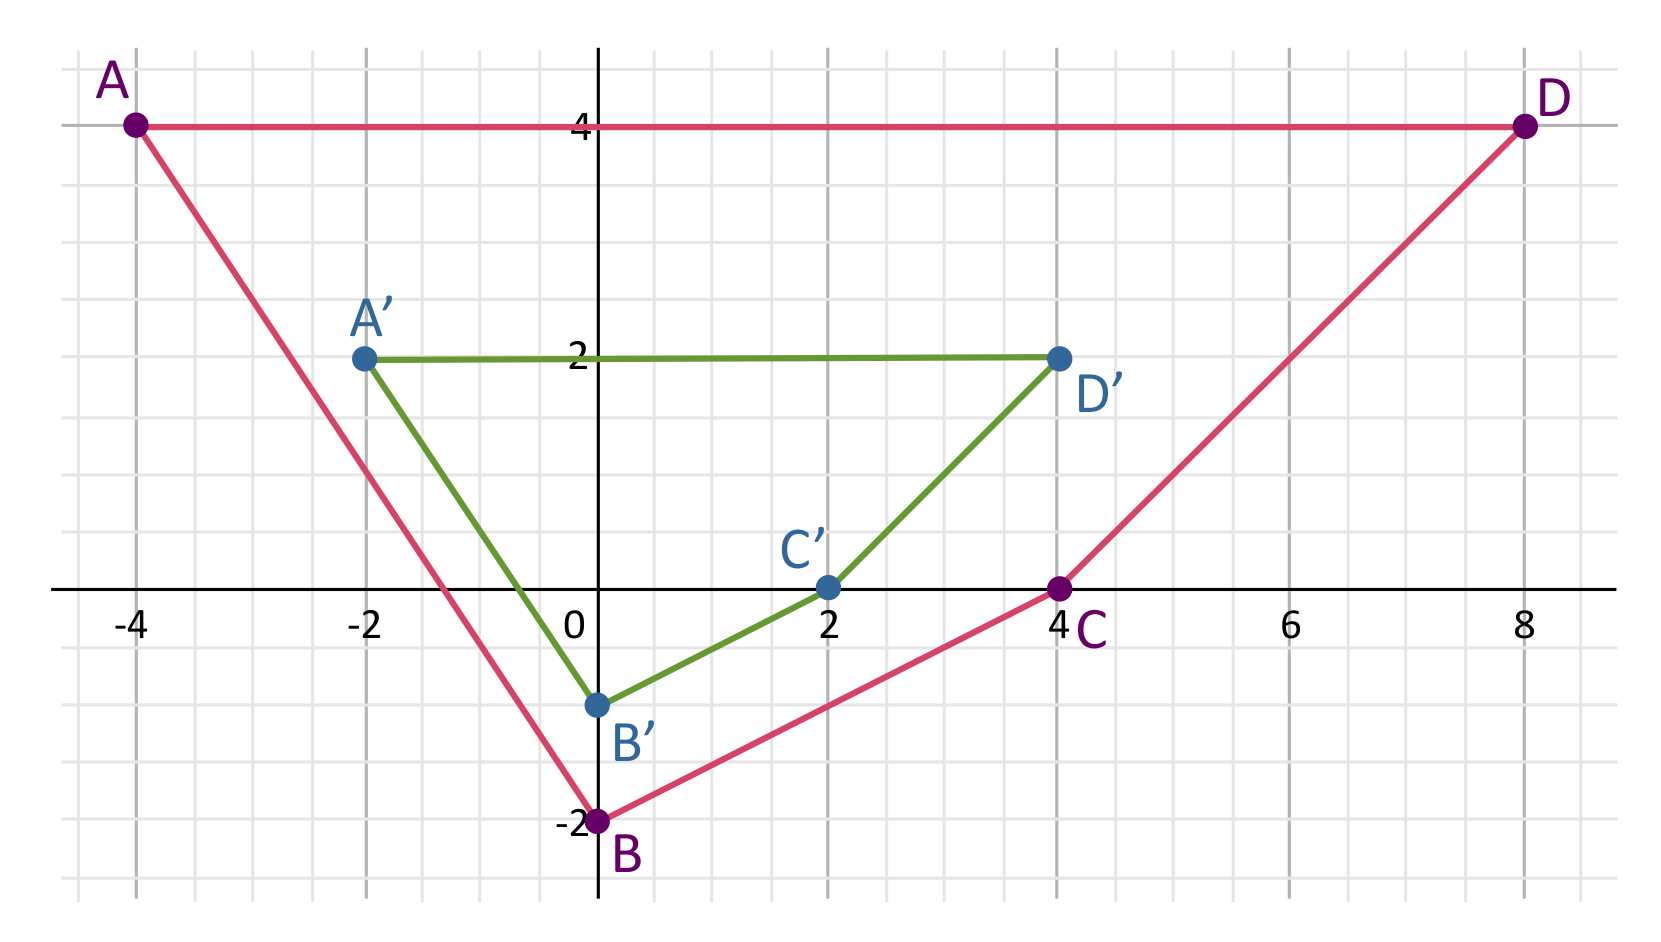 2 four-sided polygons on a coordinate plane